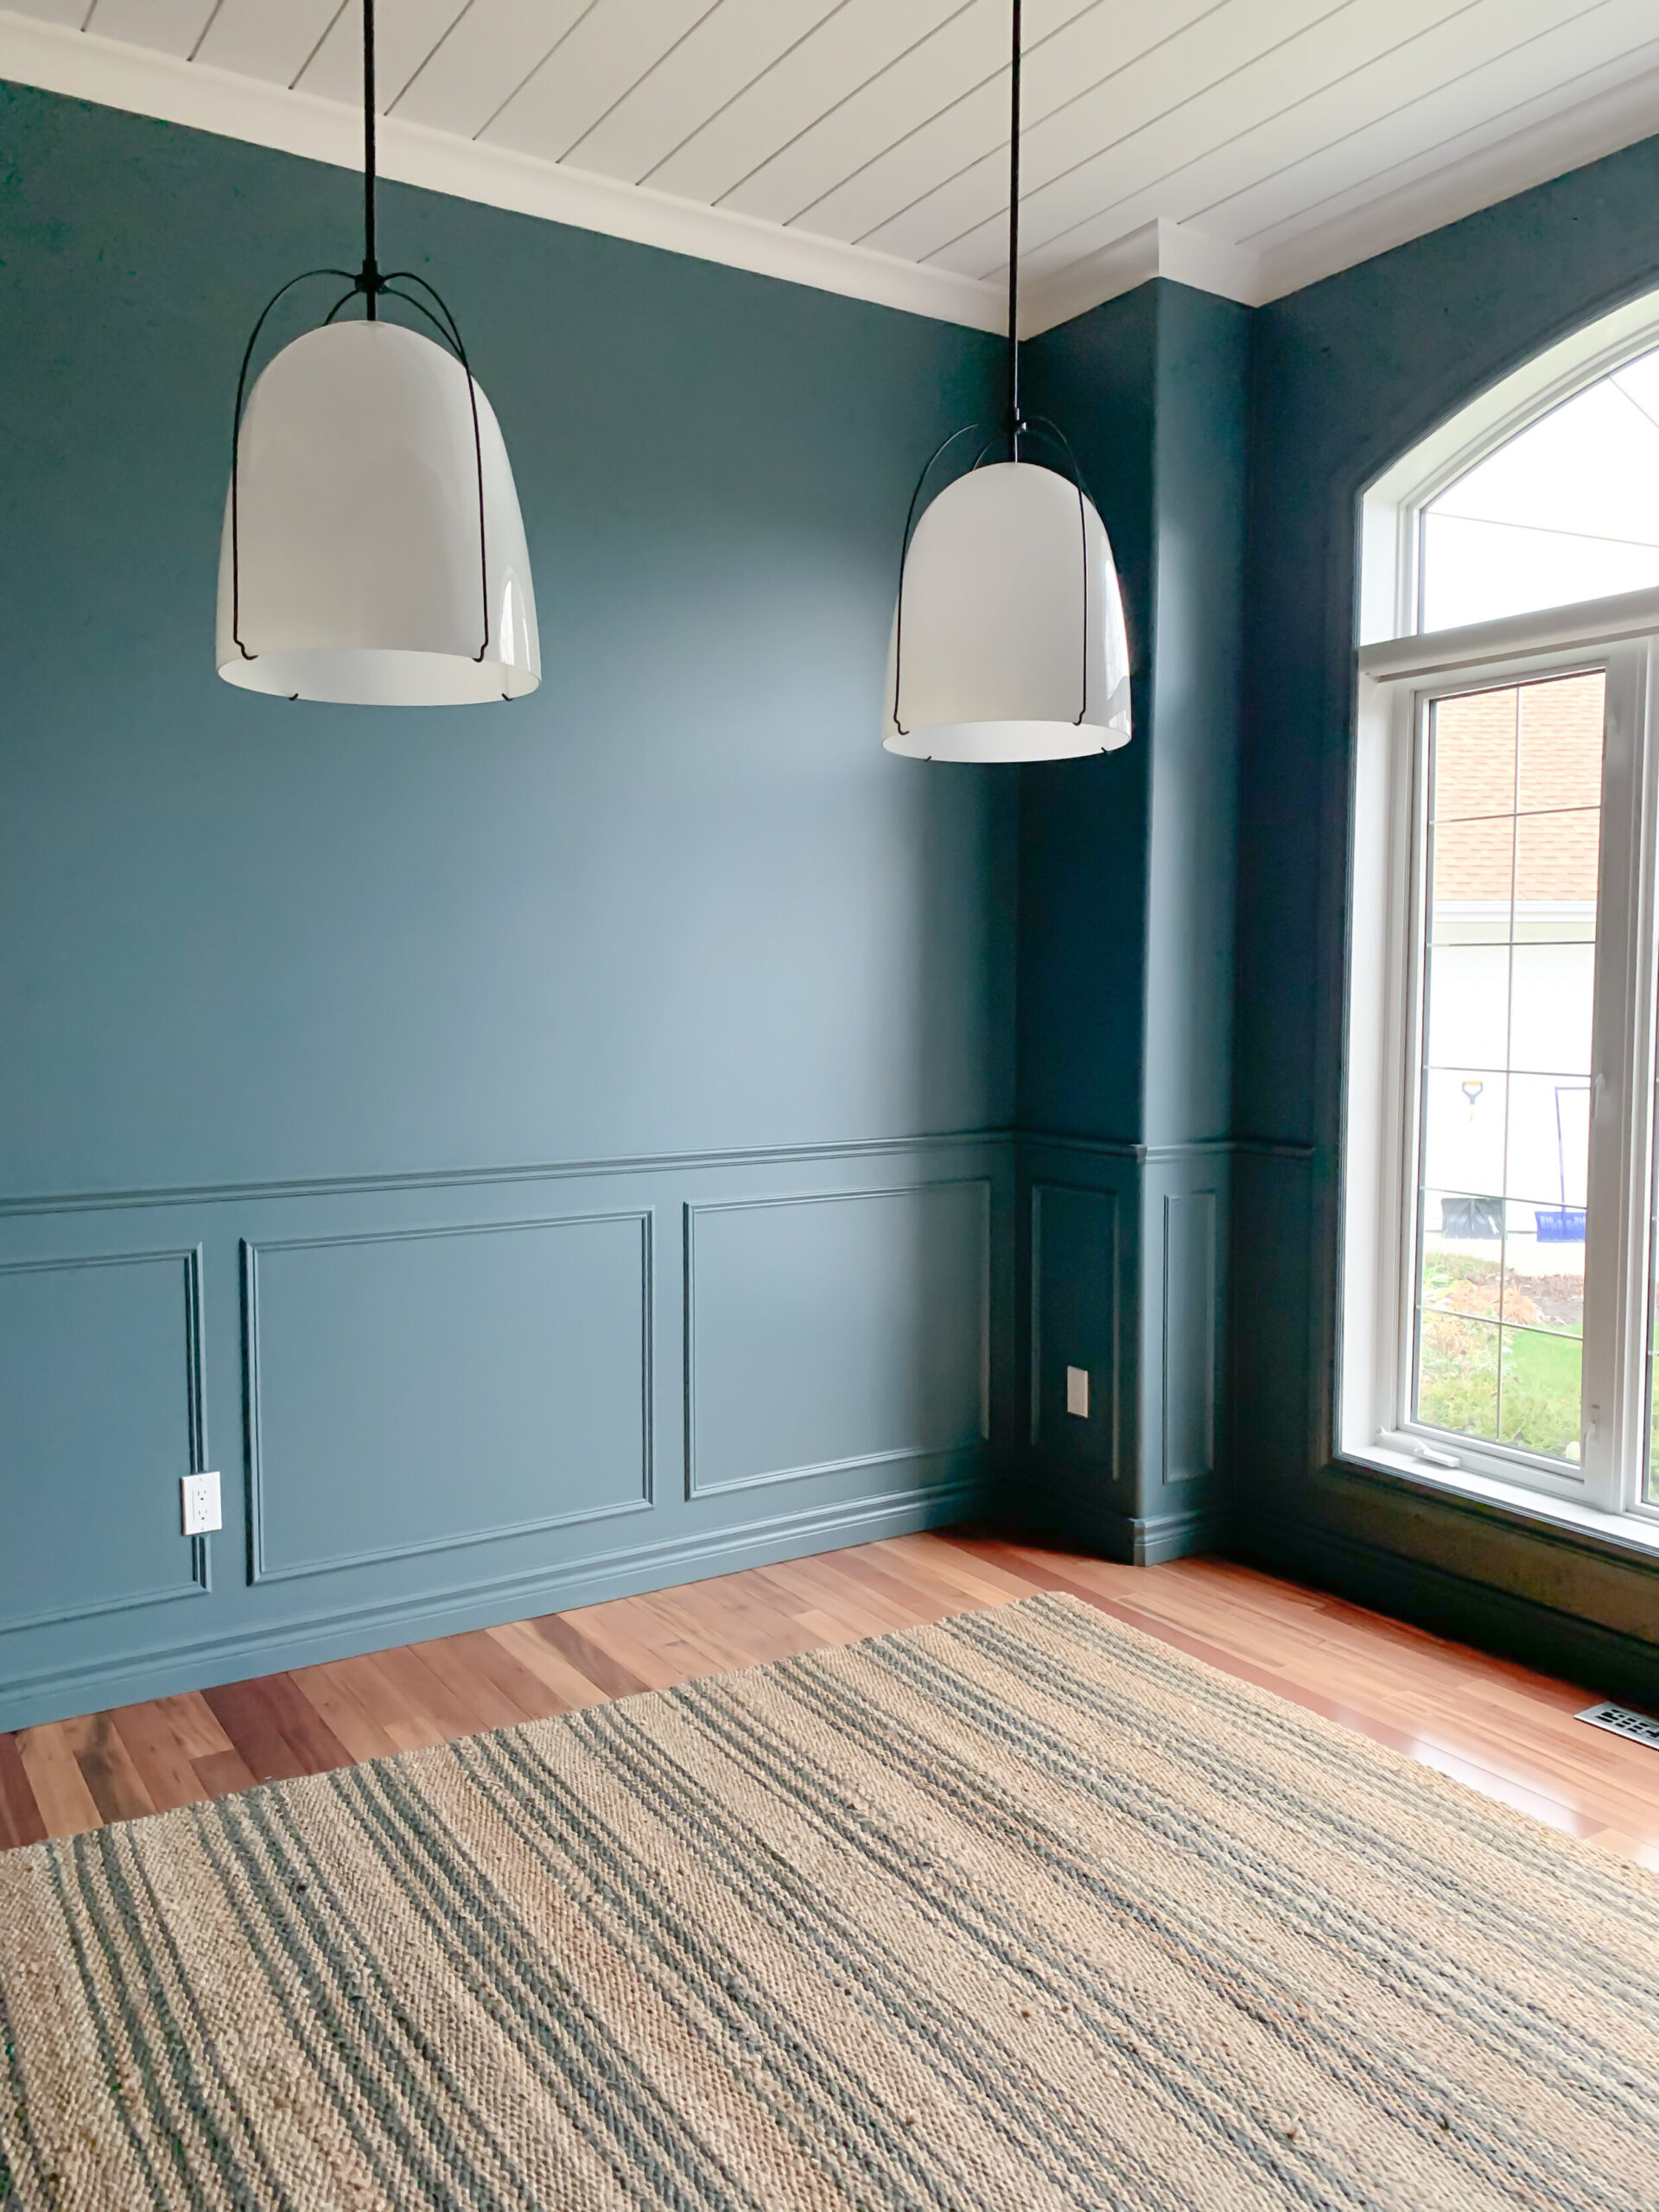 empty room with box moulding and chair rail on the bottom part of the room, blue walls, wood floors and jute striped rug, white glass pendants and white shiplap ceiling